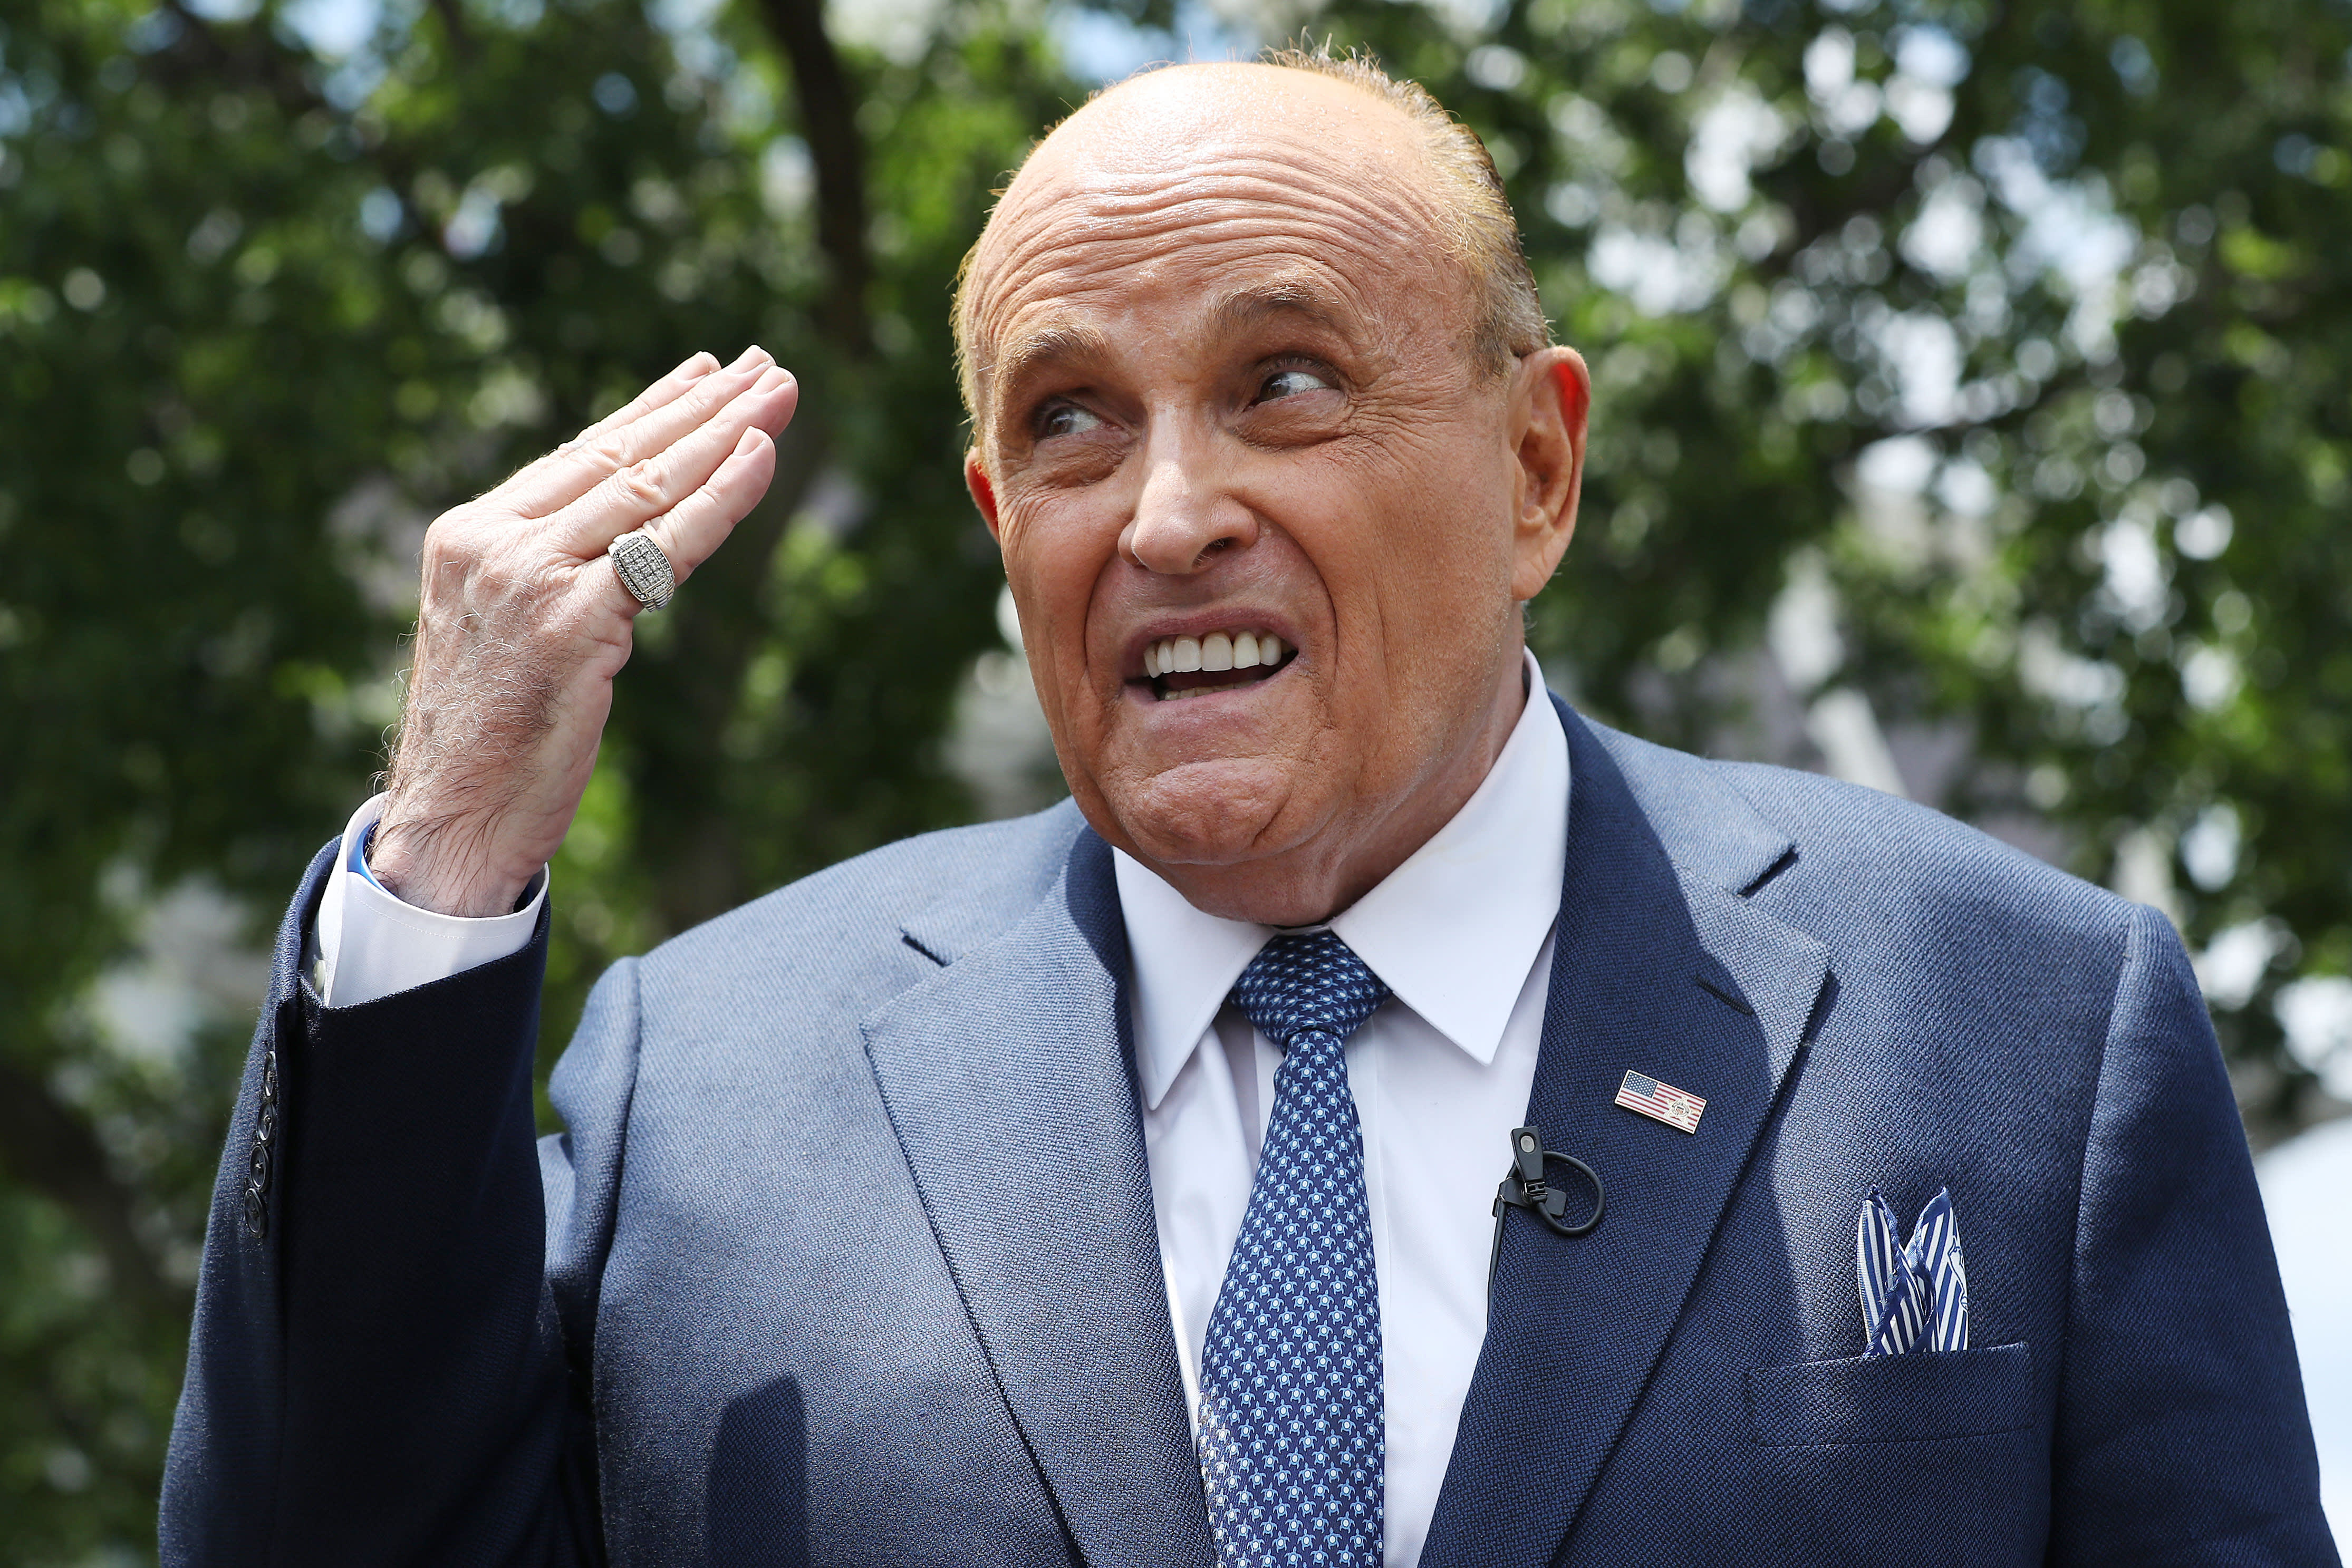 Trump’s lawyer Rudy Giuliani faces an investigation by the bar